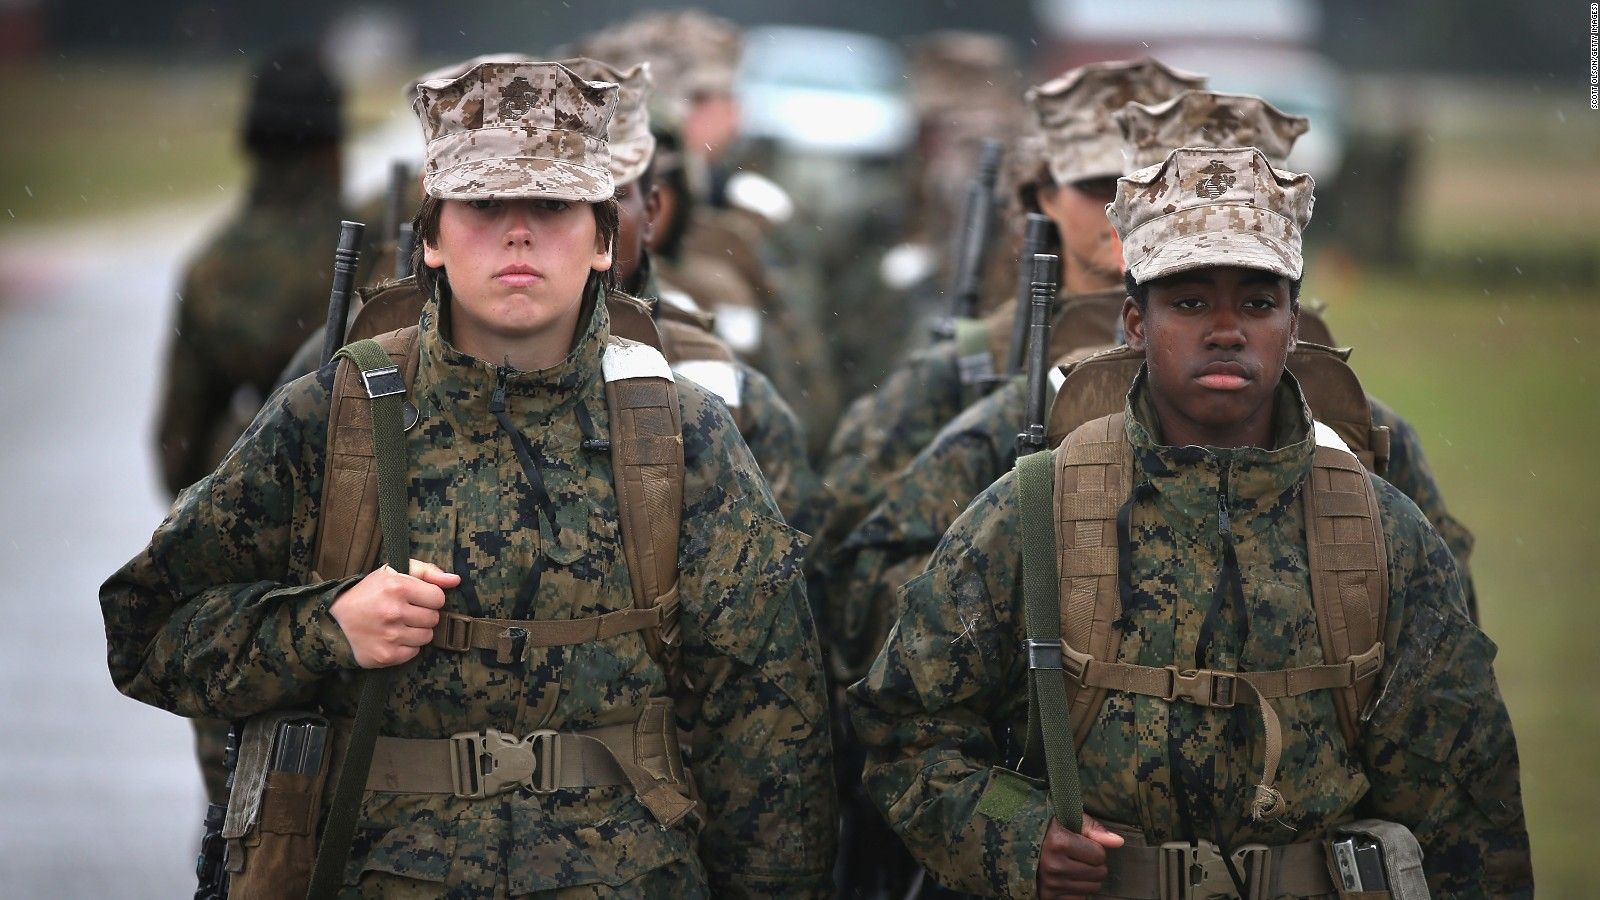 Women in military finally getting respect